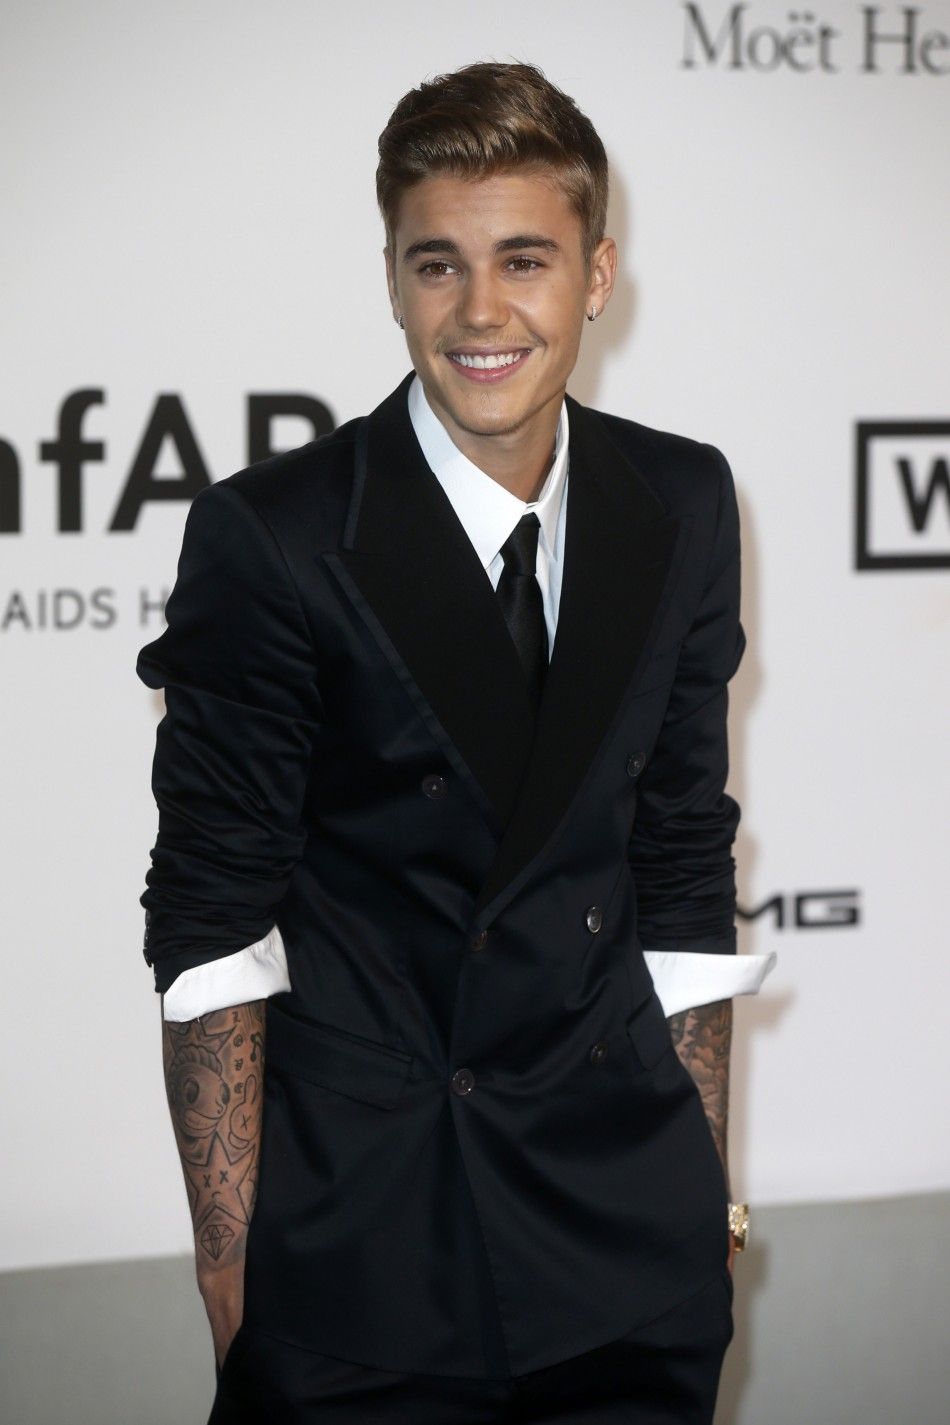 Canadian pop singer Justin Bieber arrives for amfARs Cinema Against AIDS 2014 event in Antibes during the 67th Cannes Film Festival 